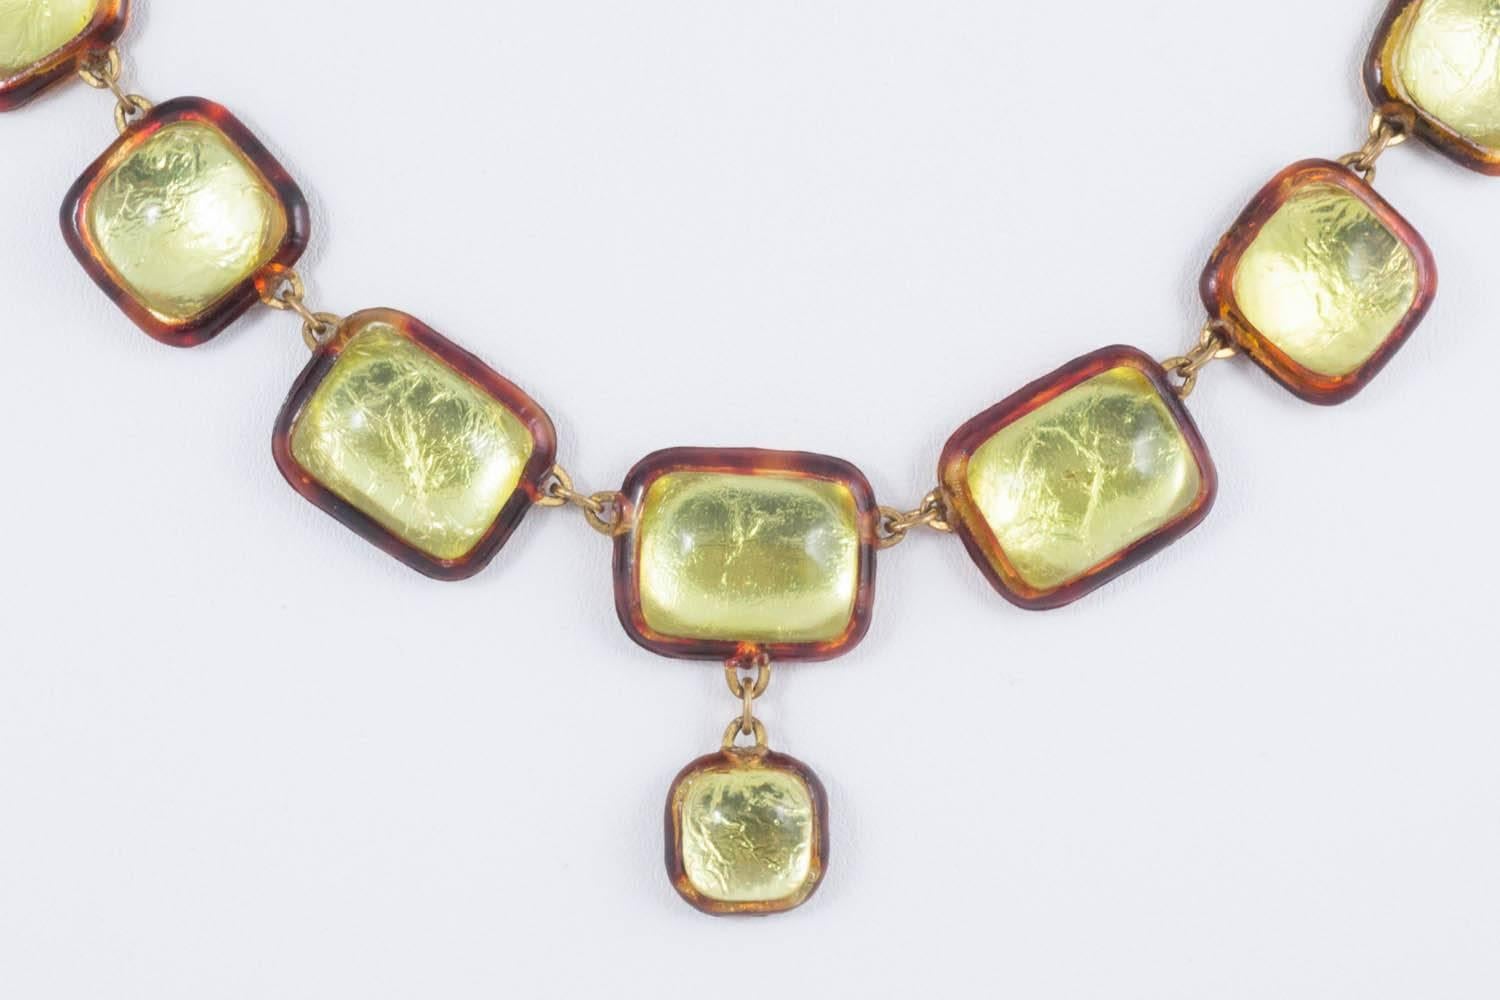 A bright and luminous necklace/sautoir made of resin and foil, in a beautiful tone of citrine/chartreuse. Attributed to Edith Barbier, it is very much in the style of work by Line Vautrin in the 1960s. Foil is place on the resin and then further